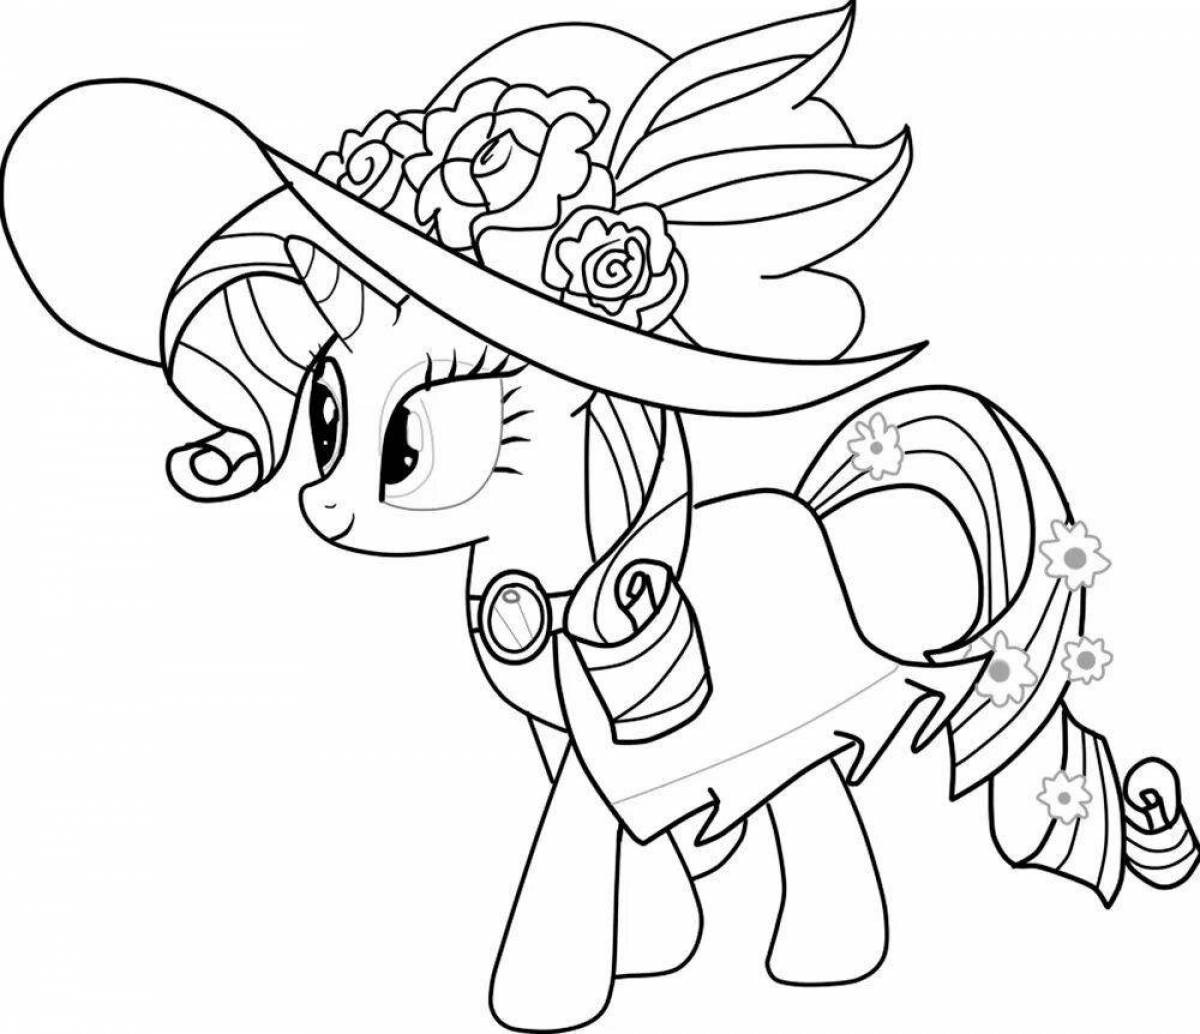 Coloring page of a pony with magic print